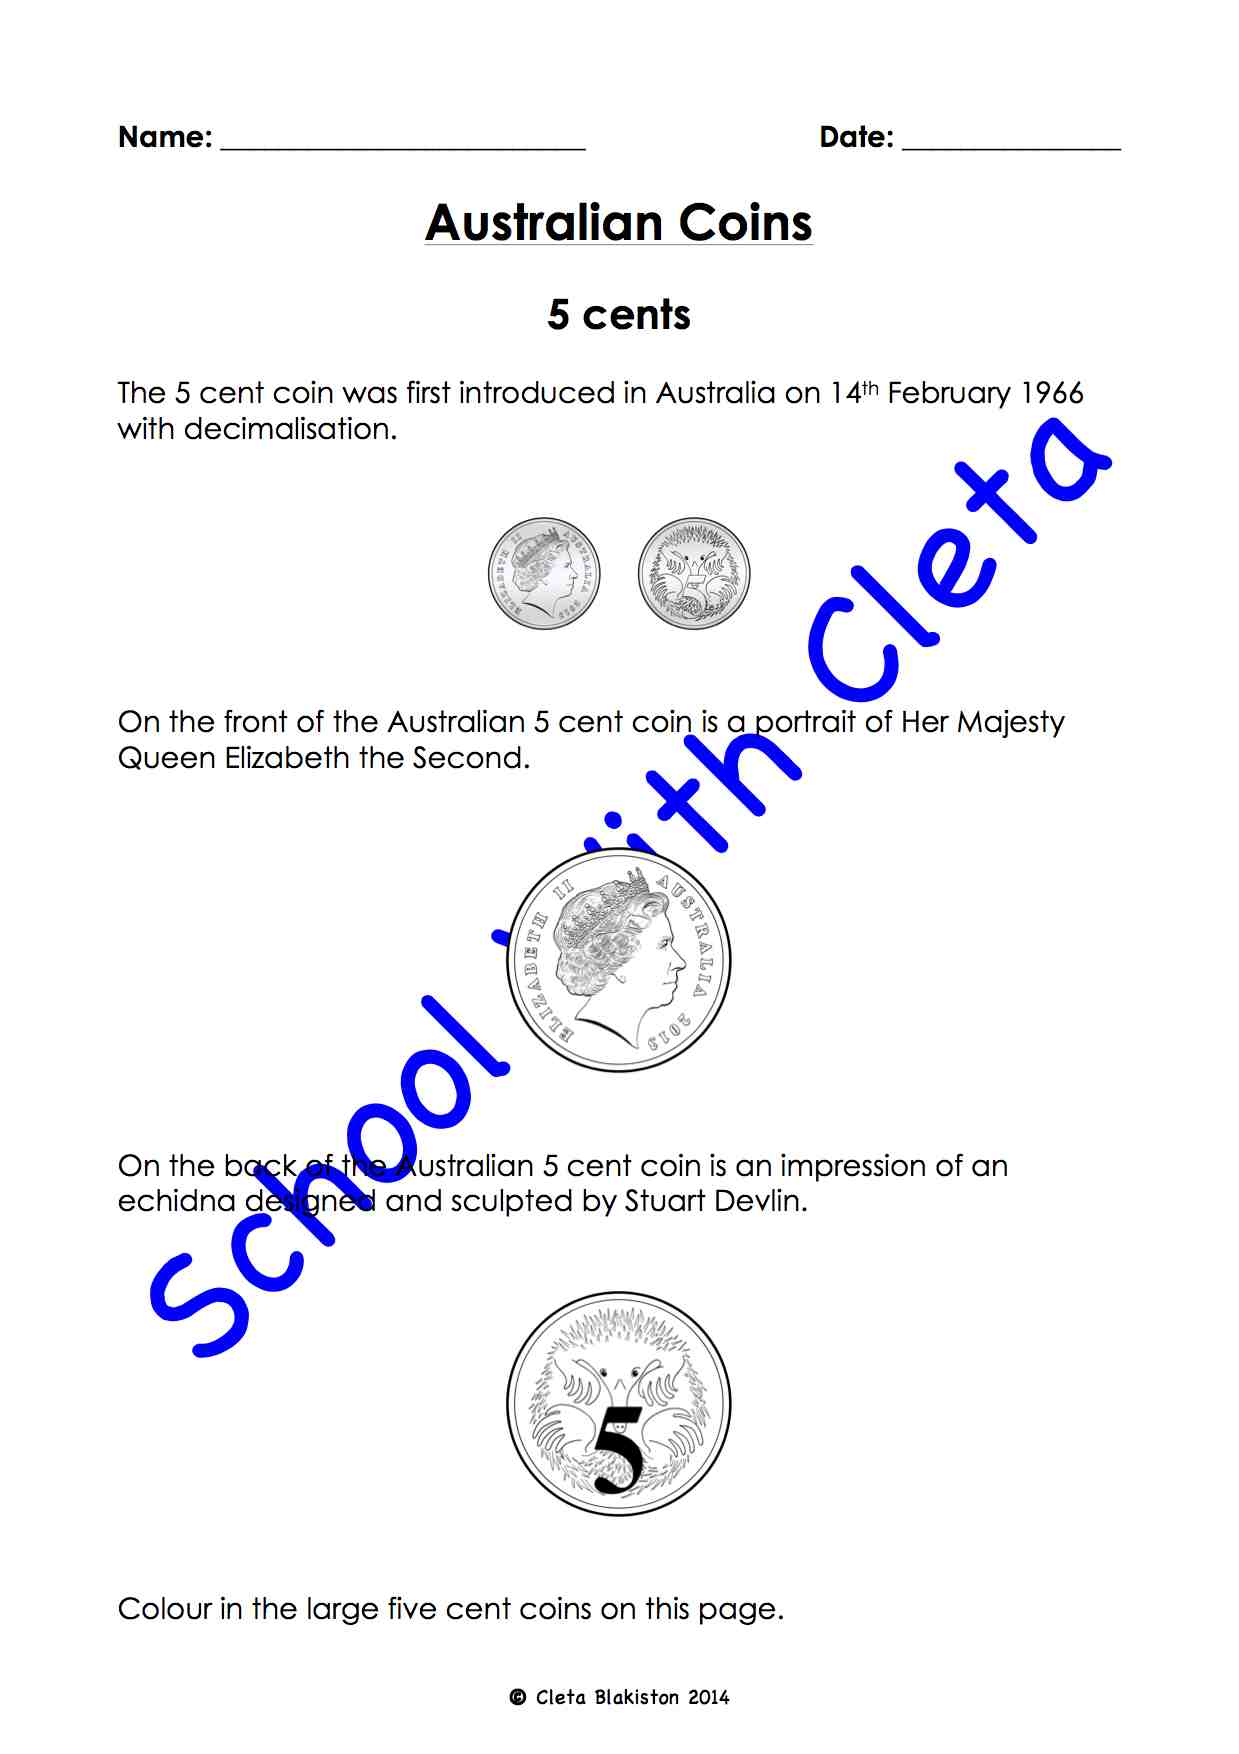 Australian Money: Their Coins' Images & Different Ways To Write Them